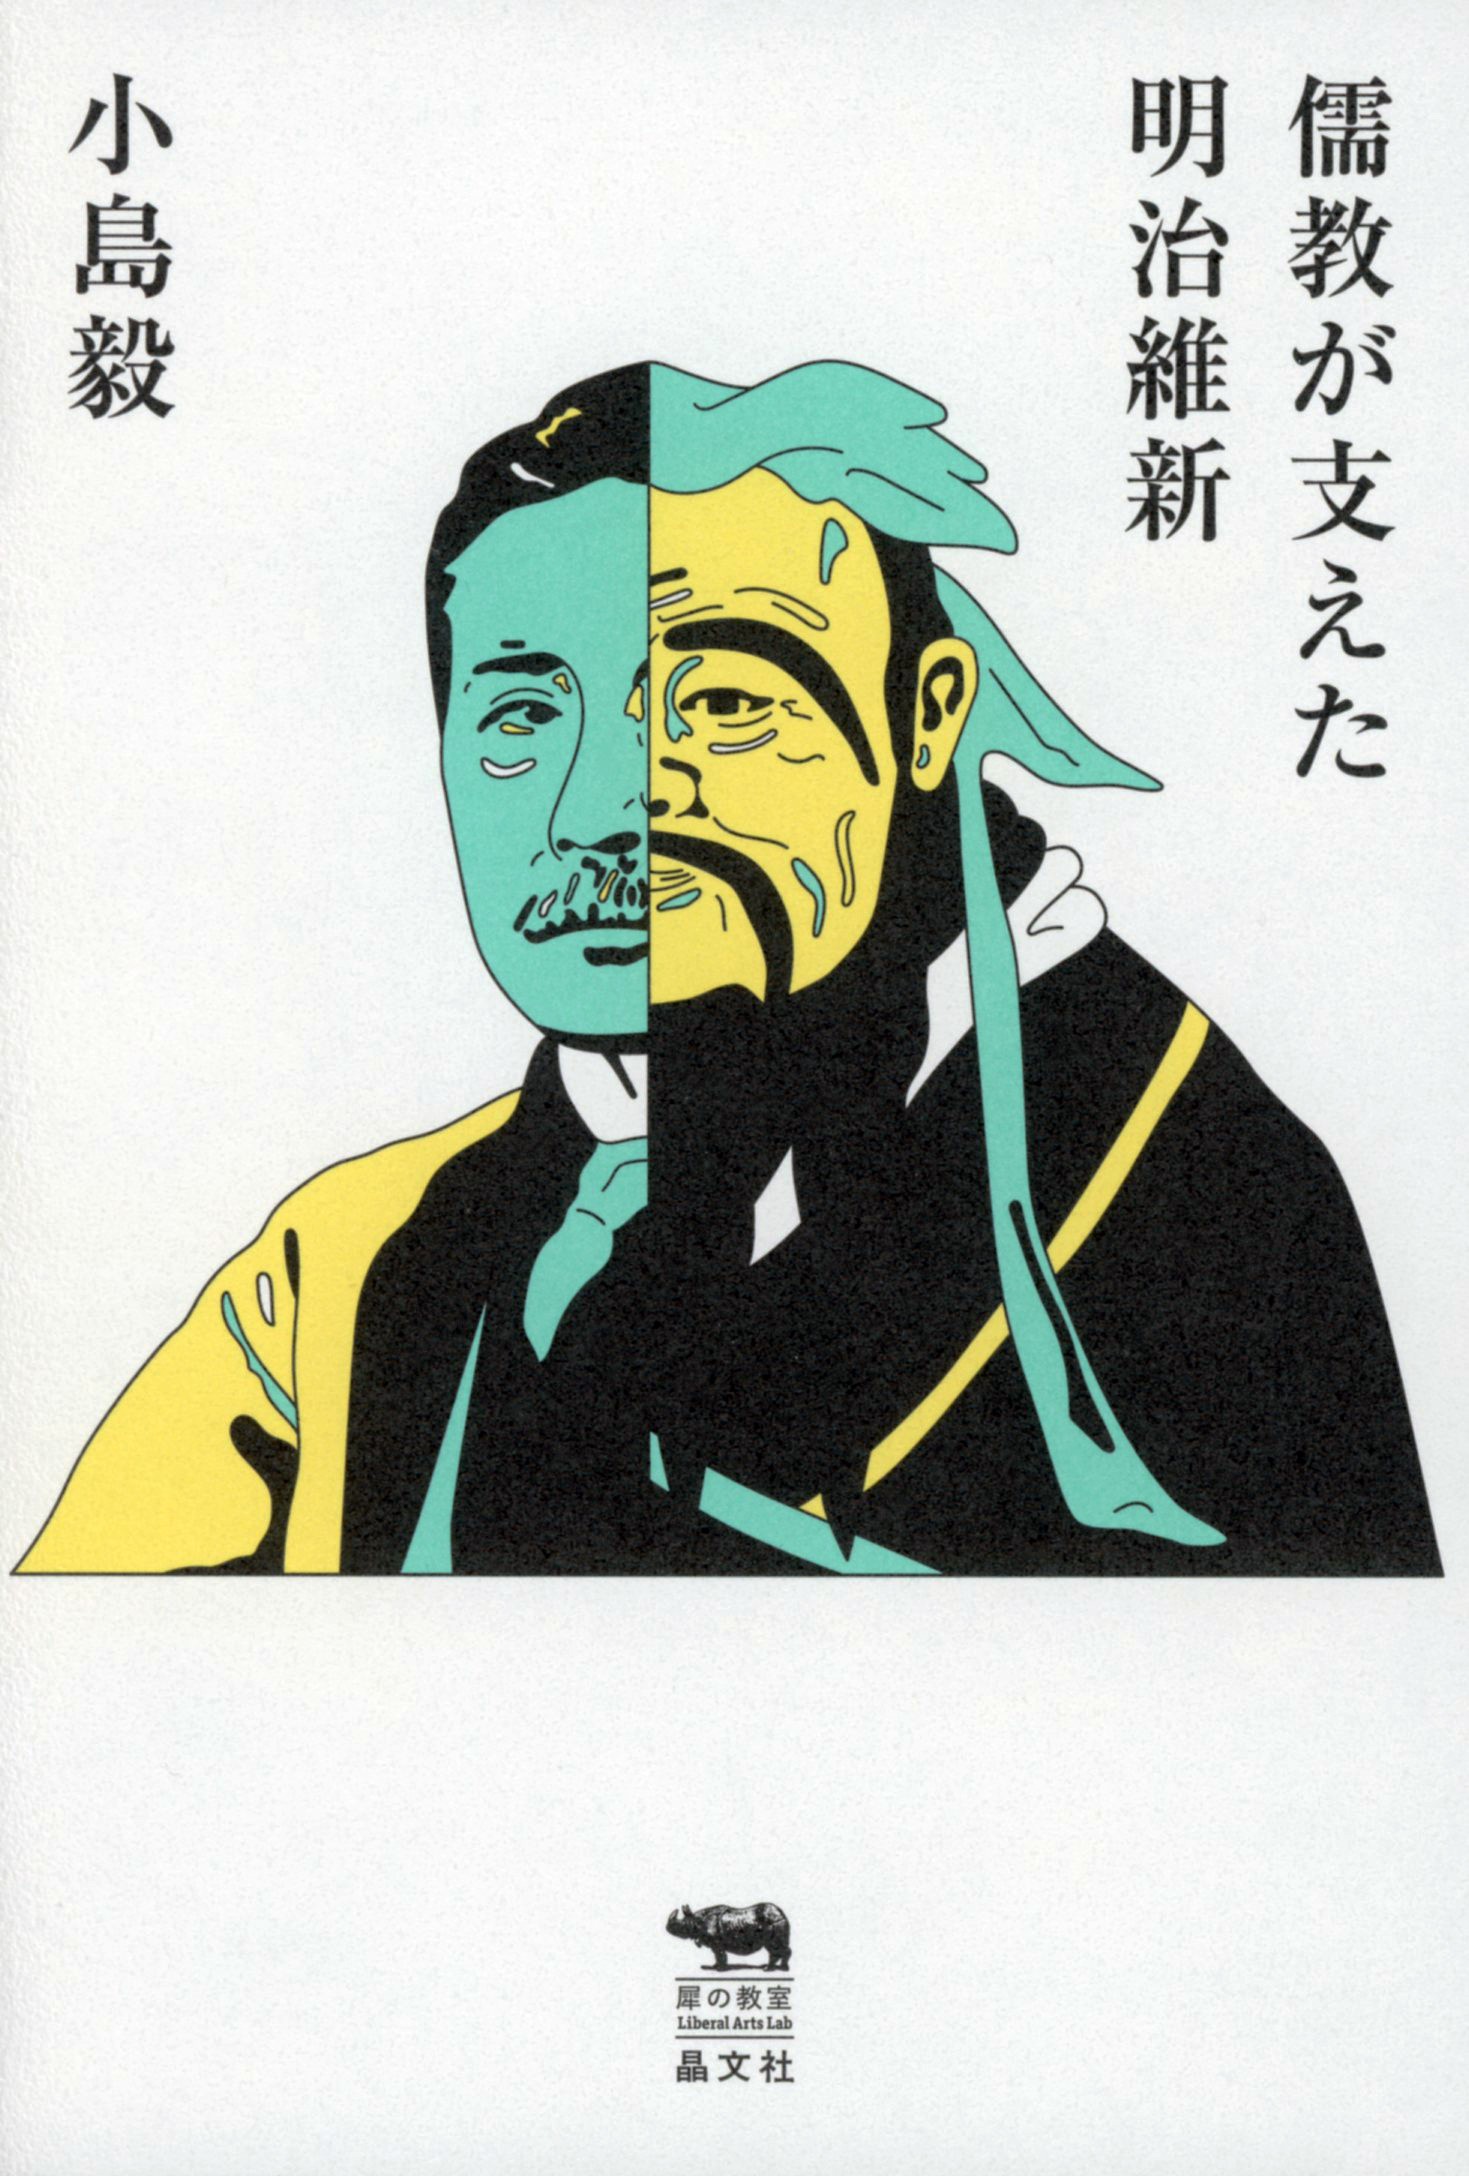 Portraits of Confucius and Soseki Natsume on a white cover